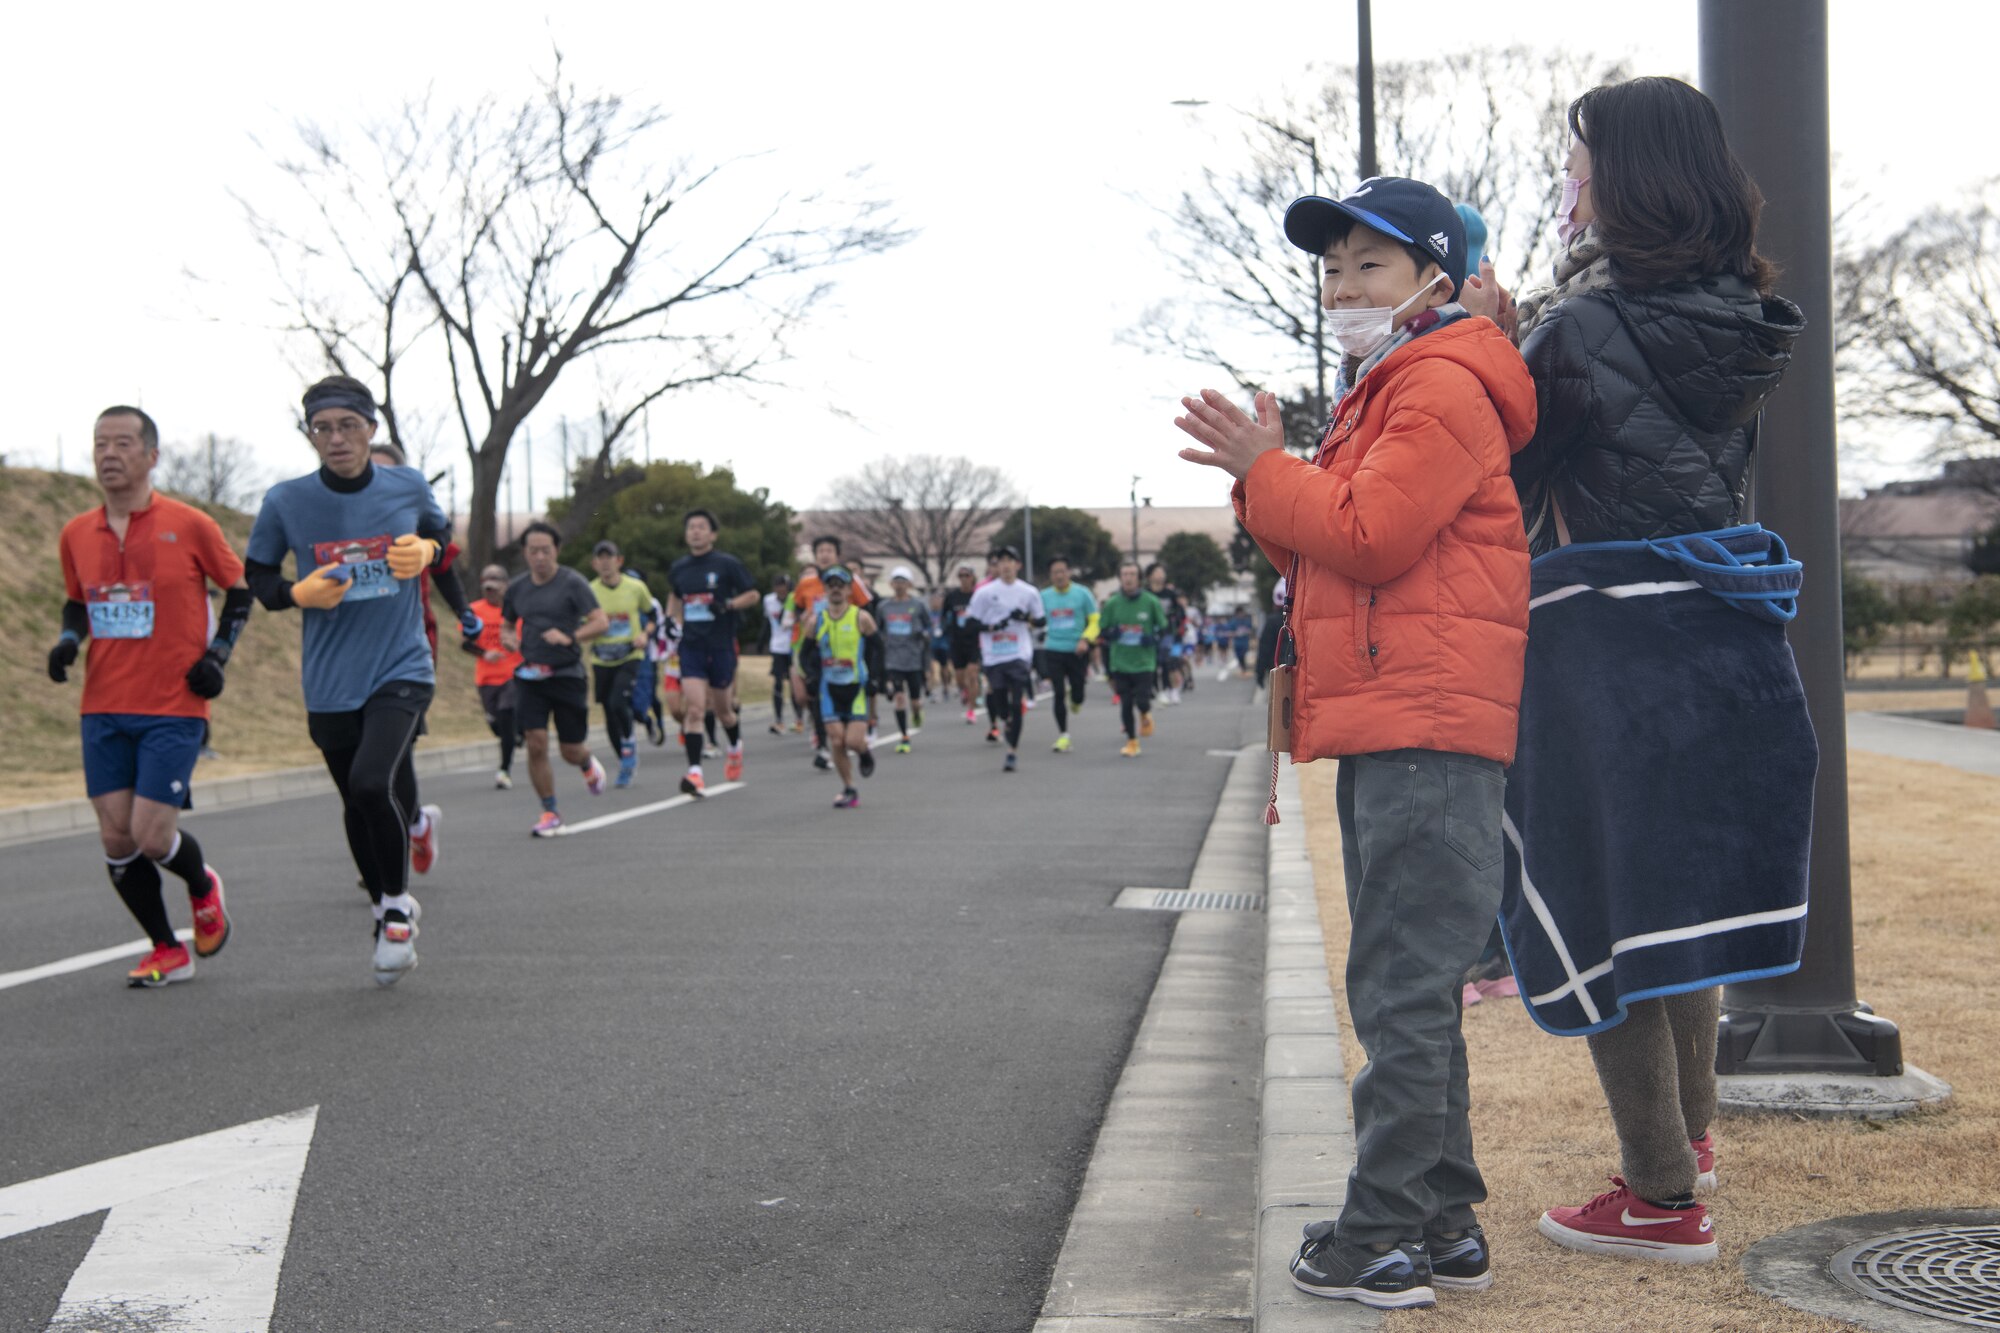 Spectators cheer for half-marathon runners during the 42nd annual Frostbite Road Race.